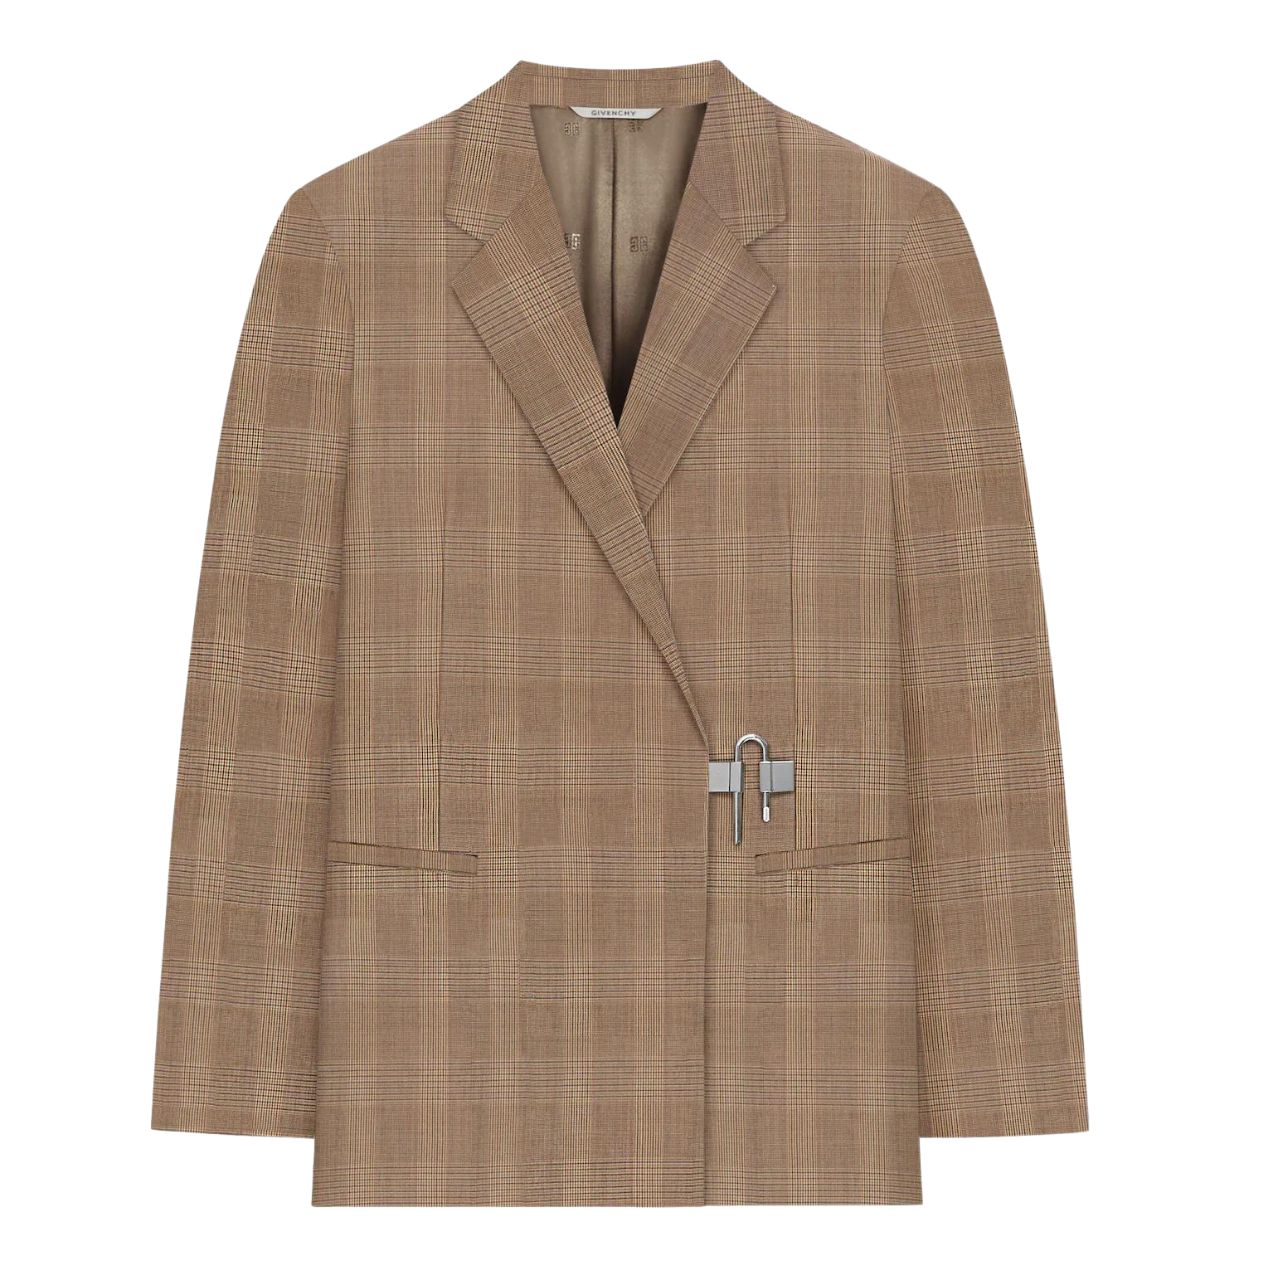 Slim fit wool jacket, available at The Webster.